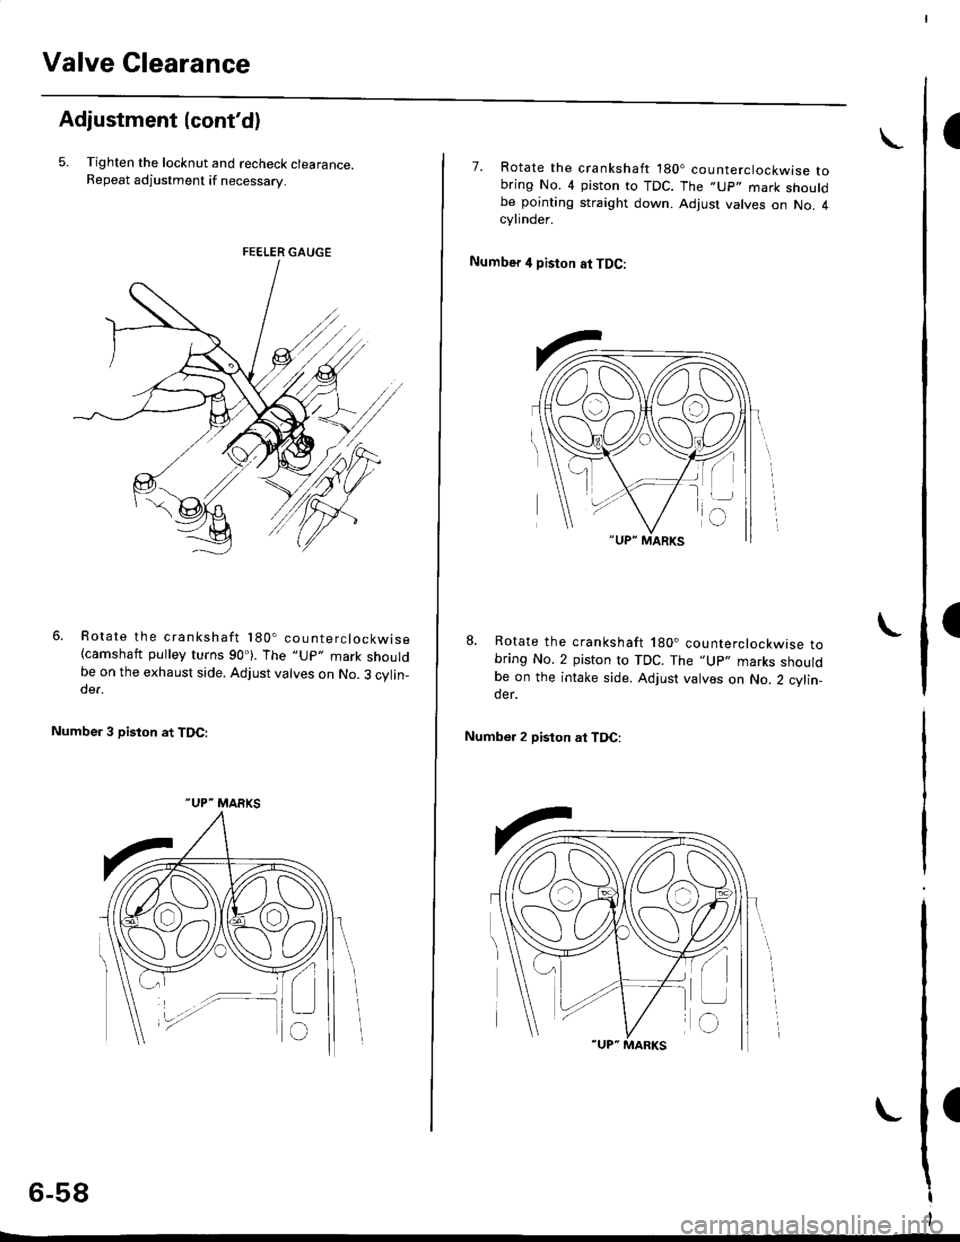 HONDA CIVIC 1999 6.G User Guide Valve Clearance
I
I
I
Adjustment {contd)
5. Tighten the locknut and recheck clearance.Repeat adjustment if necessary.
Rotate the crankshaft 180. counterclockwise(camshaft pulley turns 90). The "Up" 